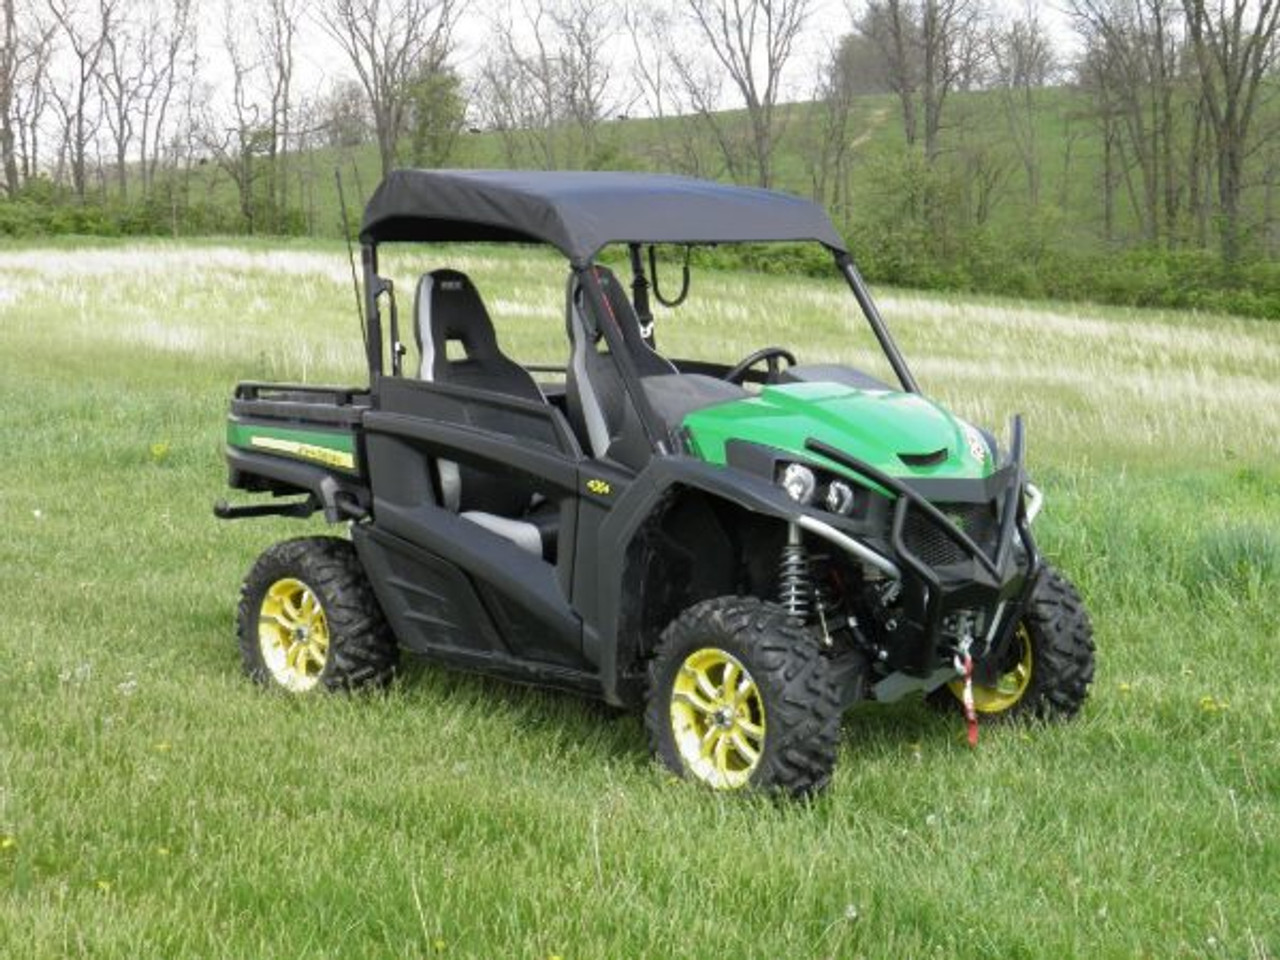 John Deere Gator RSX 850/860 Soft Top front and side angle view distance